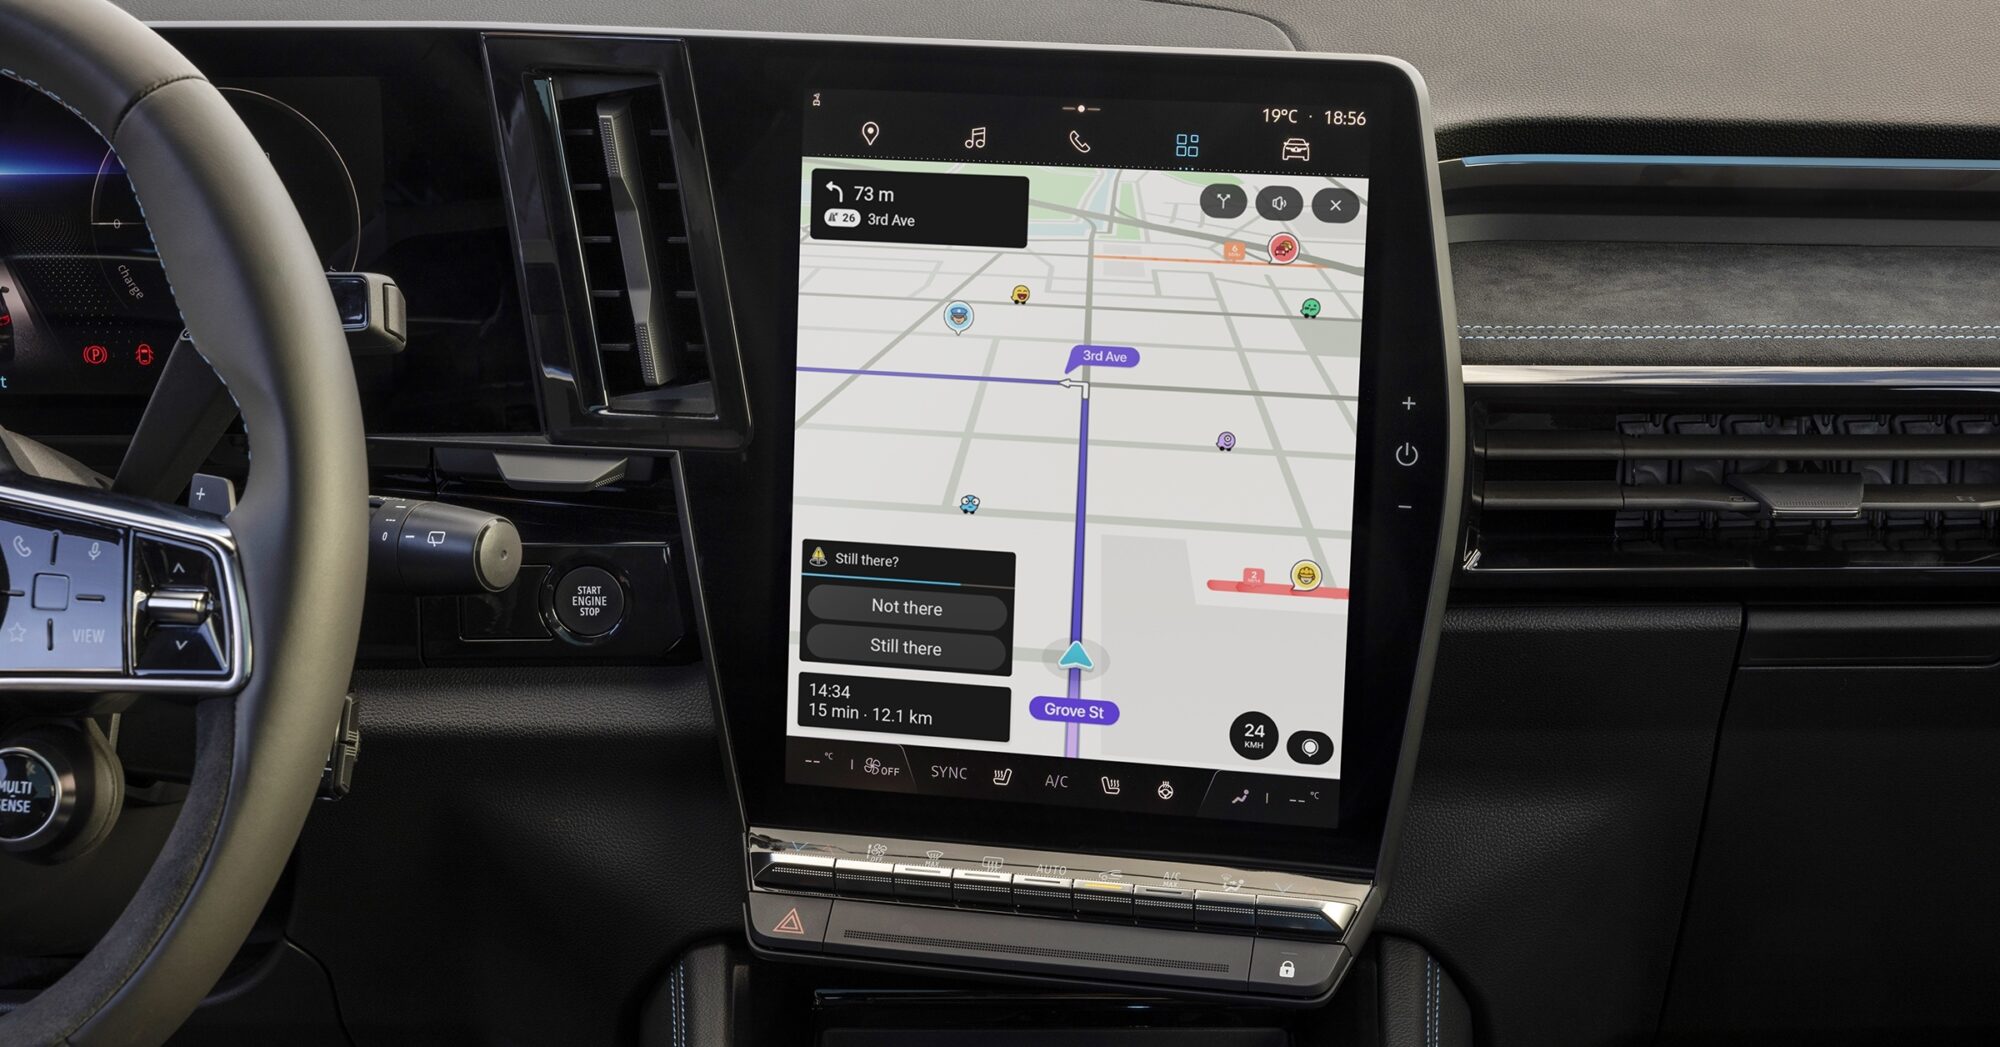 Renault, the first brand to integrate Waze directly into its multimedia system